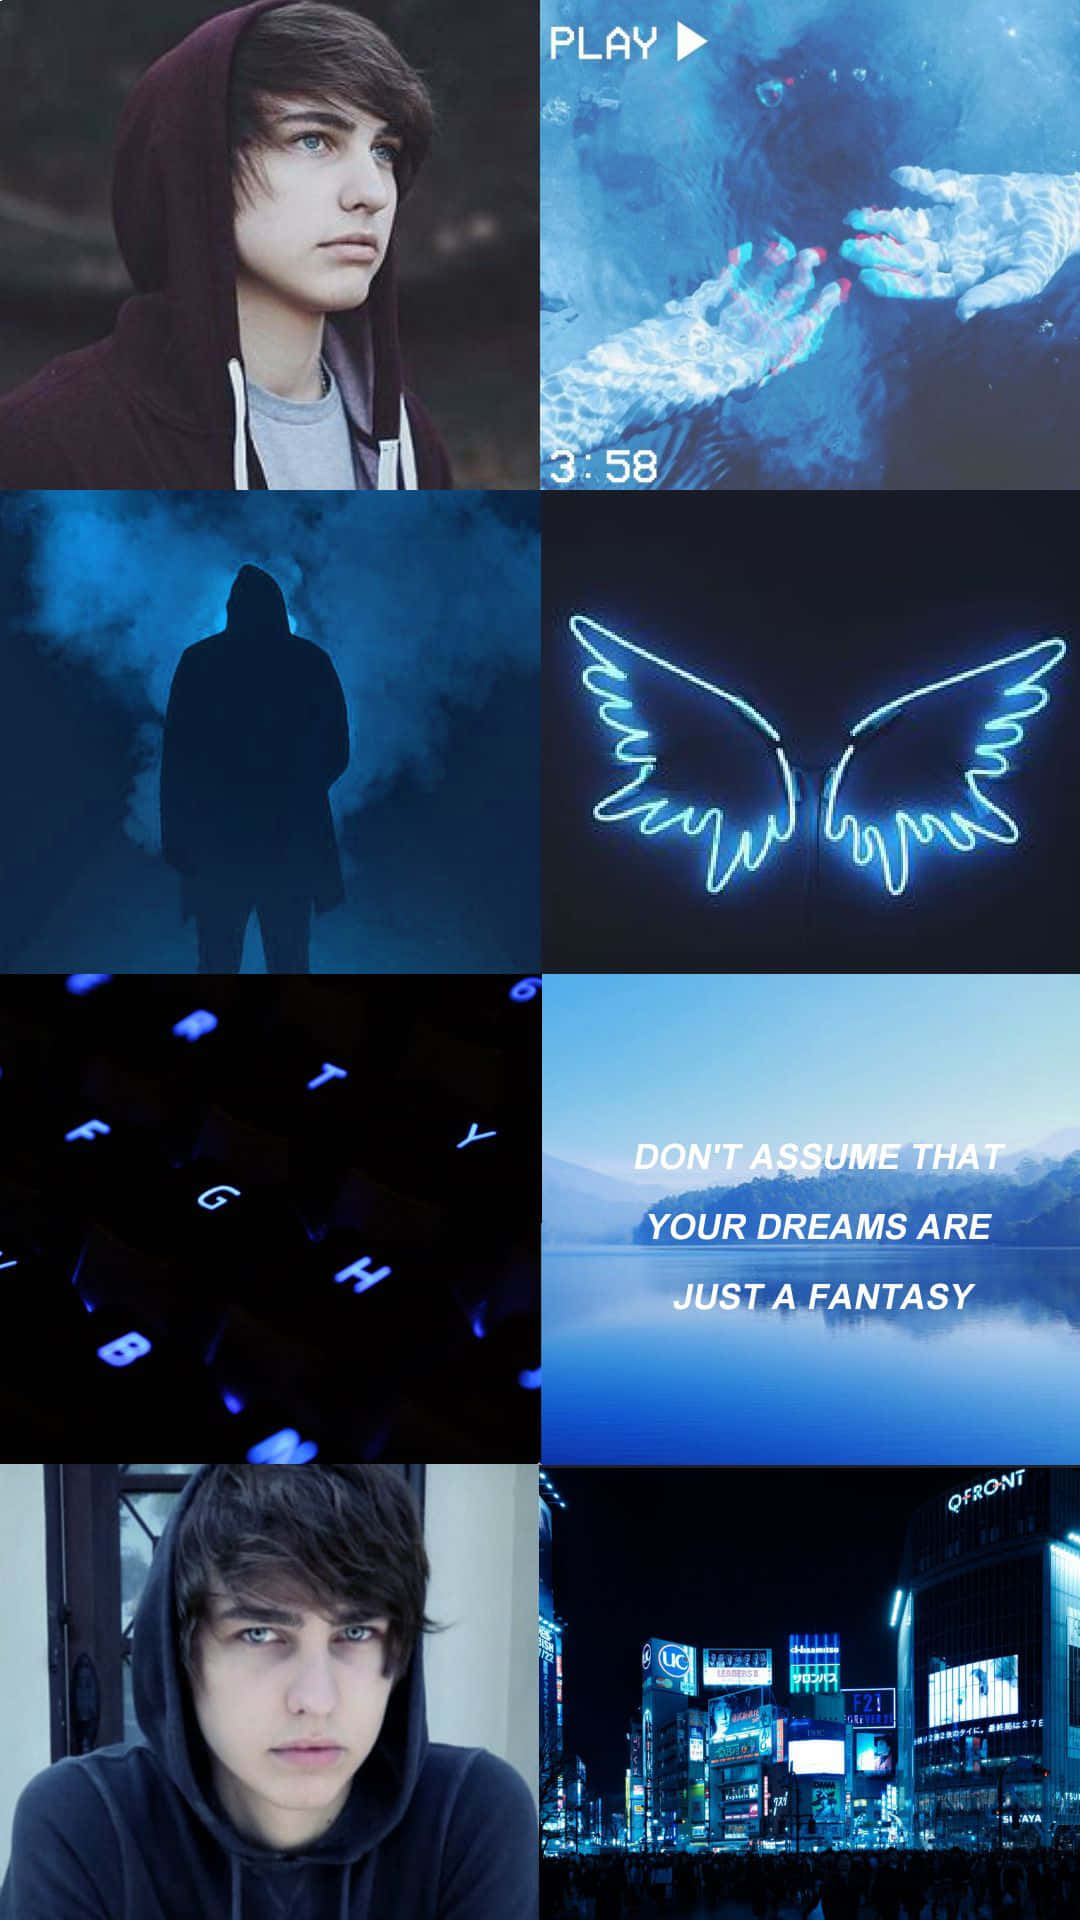 A Collage Of Images With Blue Lights And A Man With Wings Wallpaper